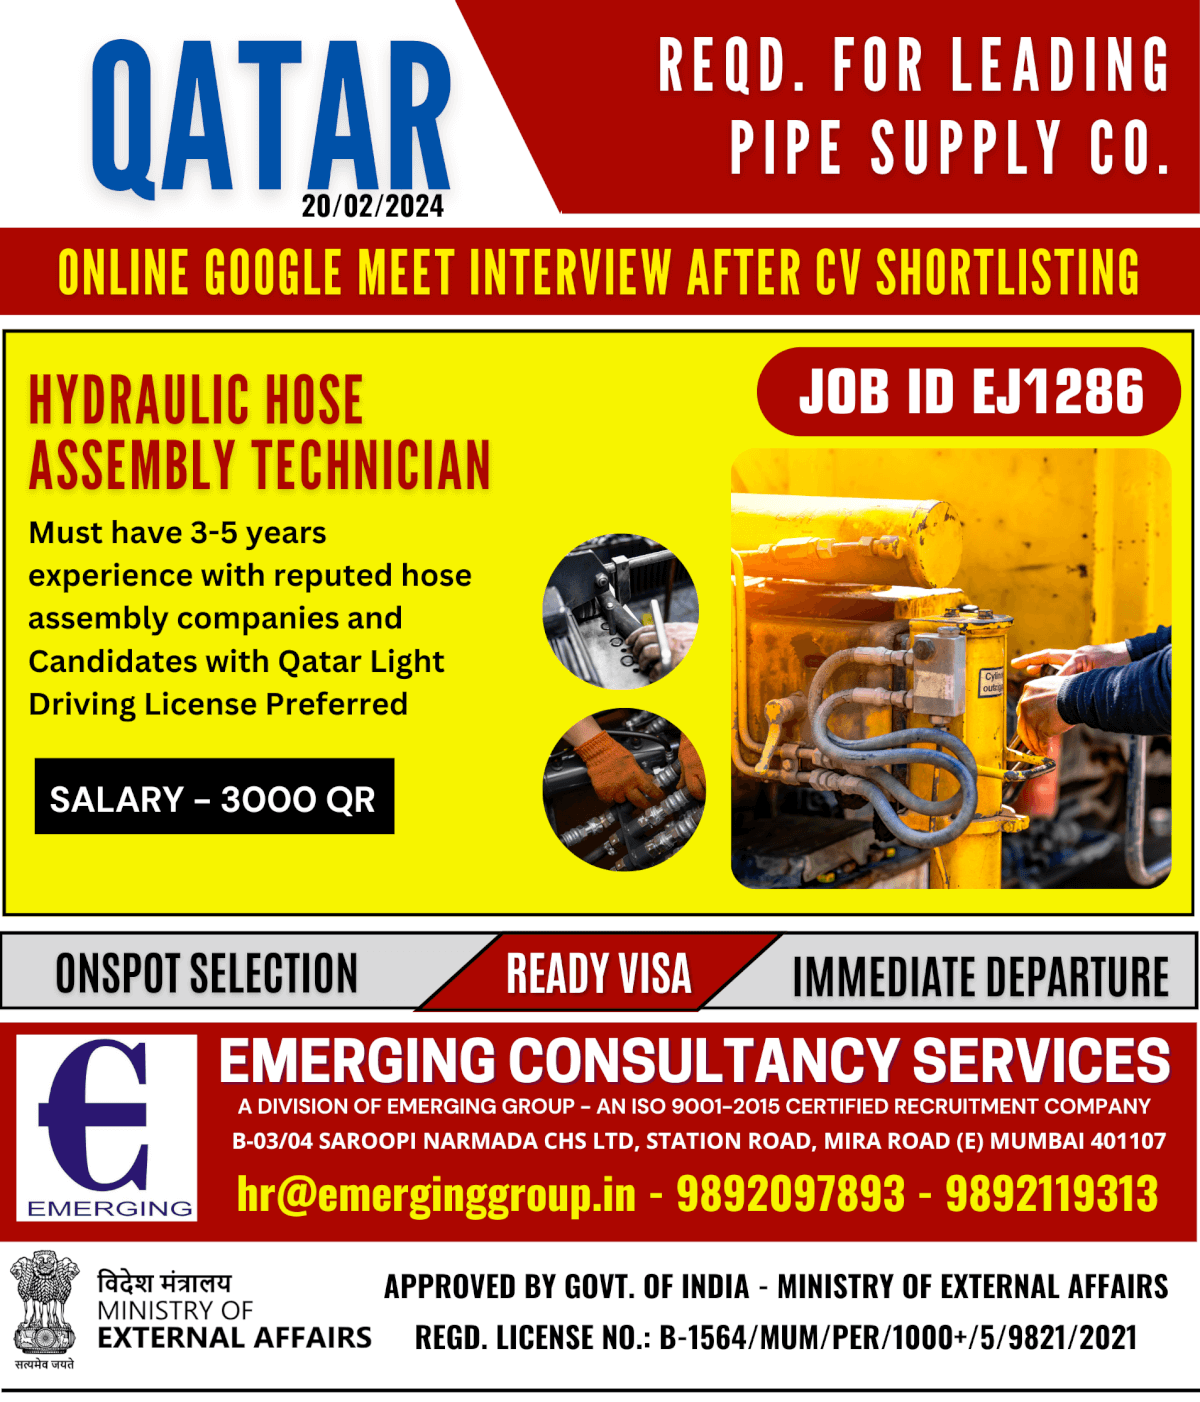 Urgent required FOR LEADING PIPE Company in Qatar